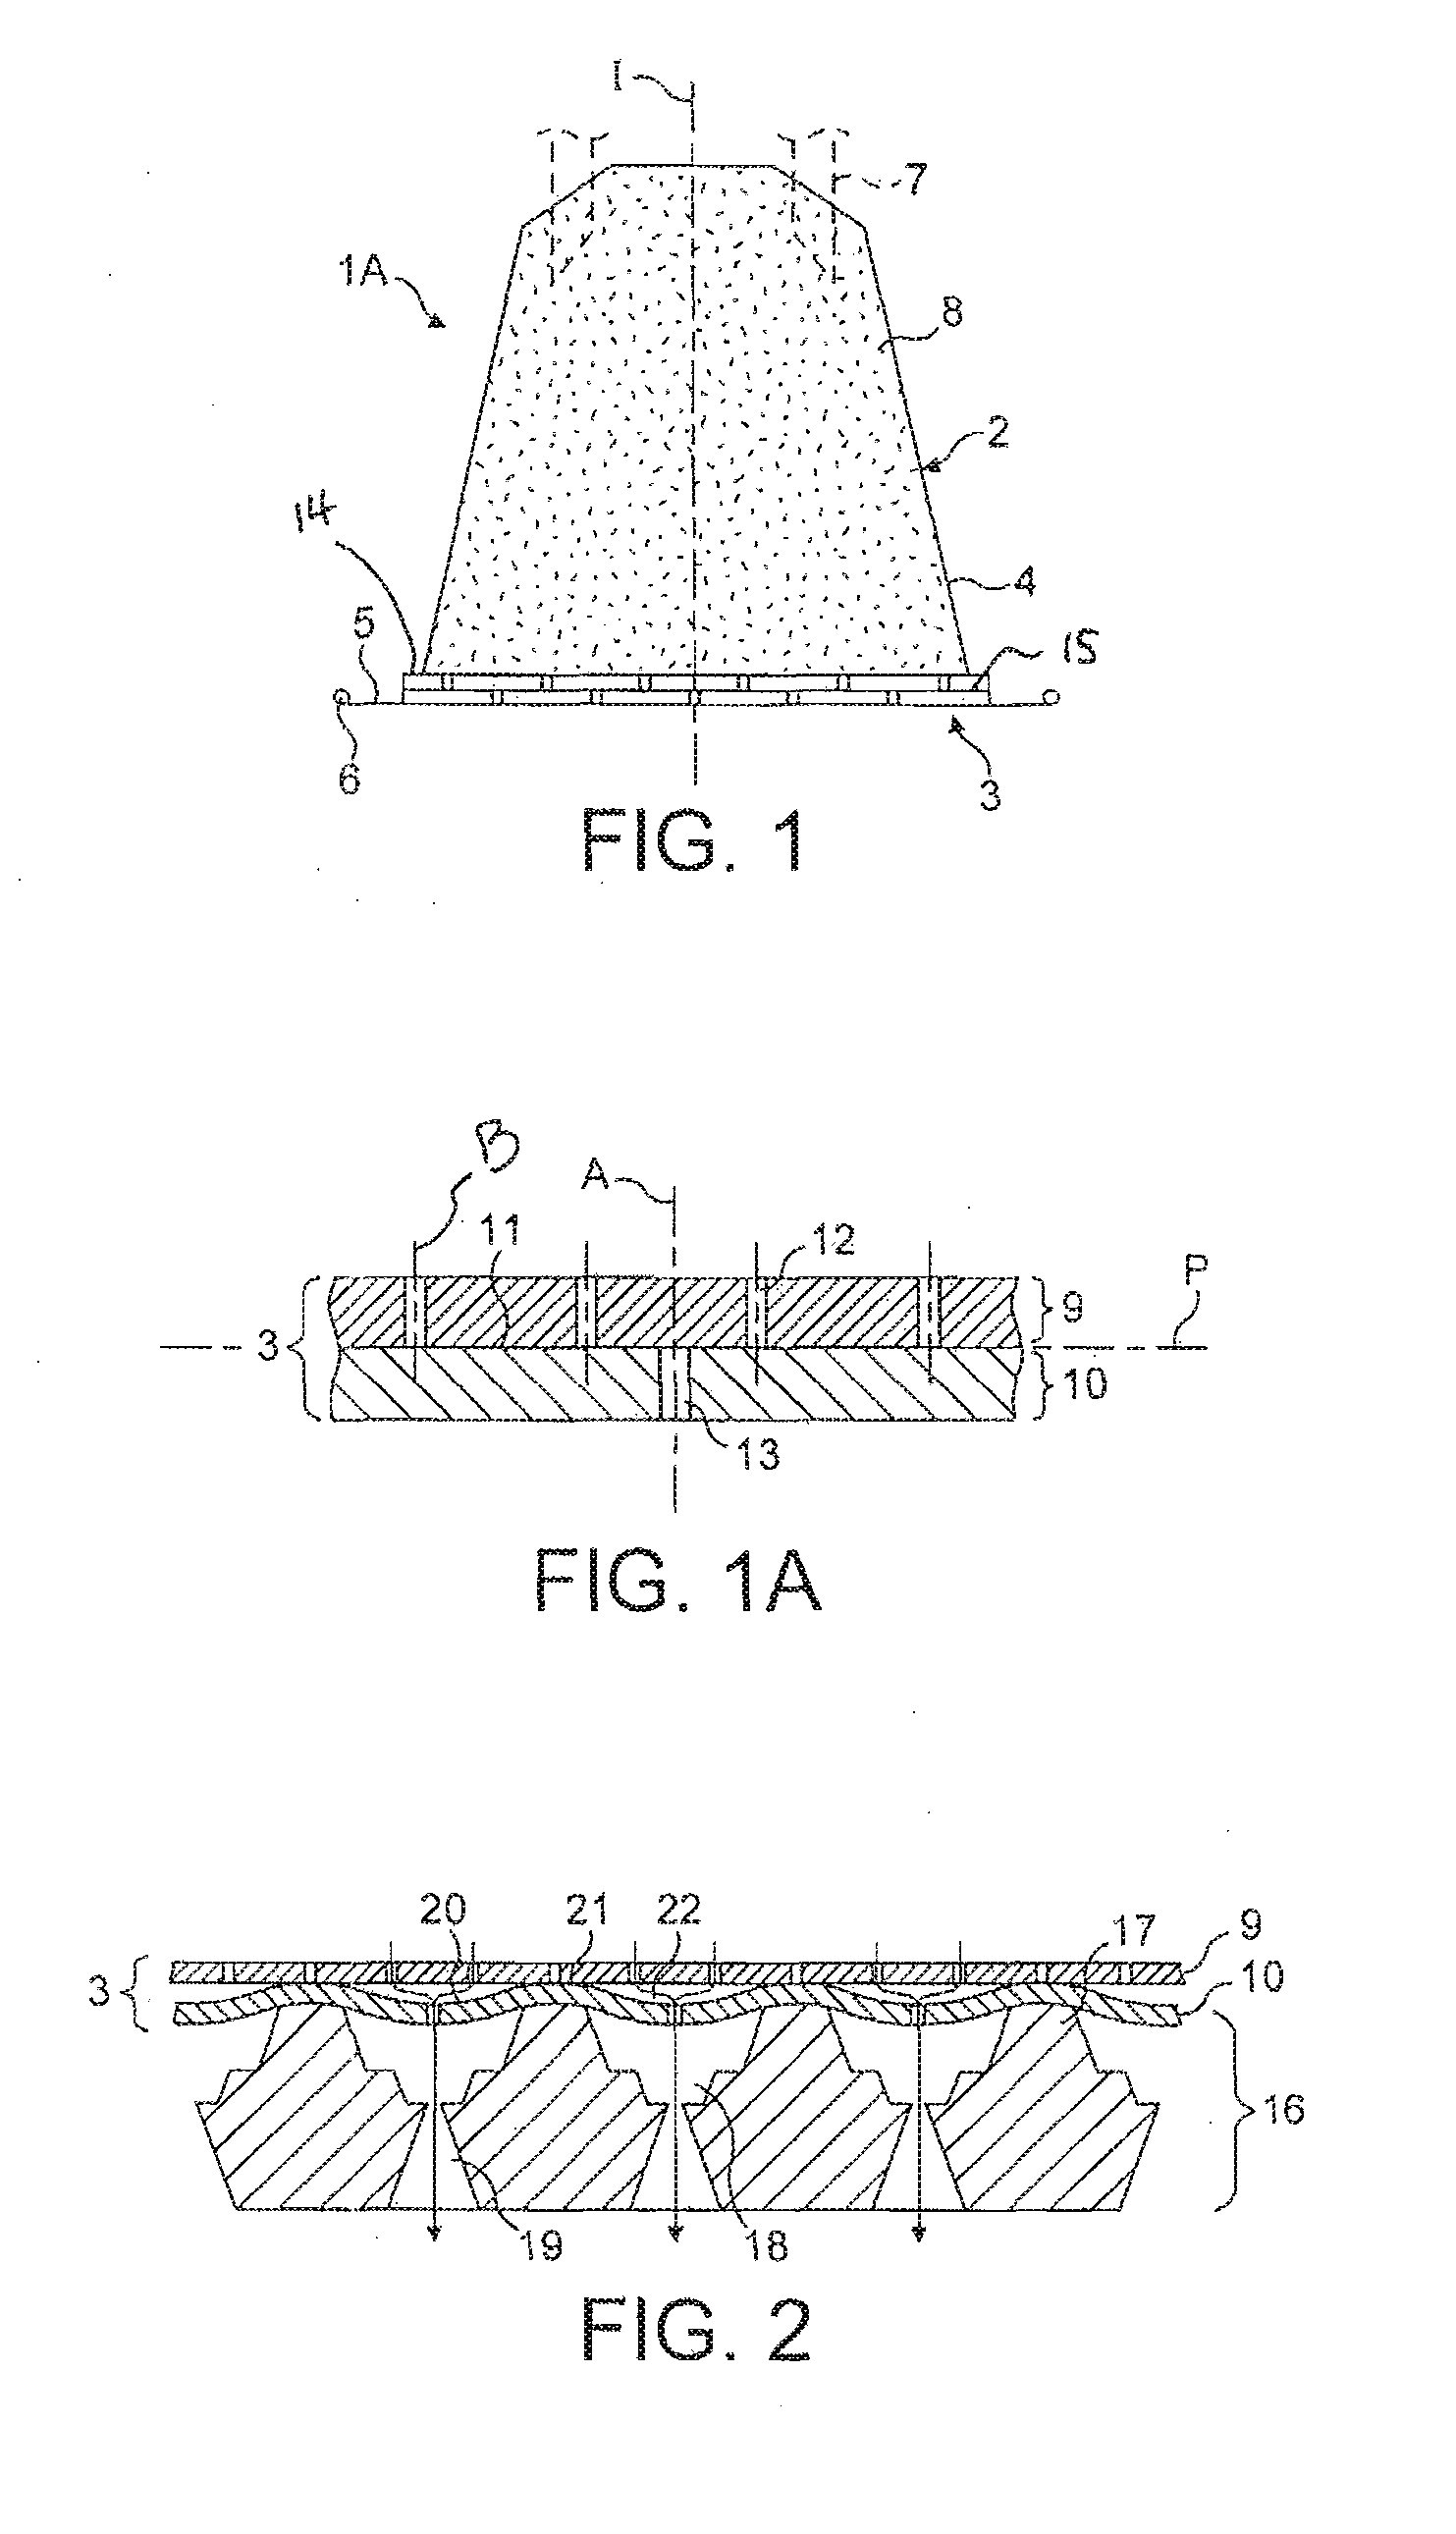 Capsule for preparation of a beverage with a delivery wall forming a confined flowpath